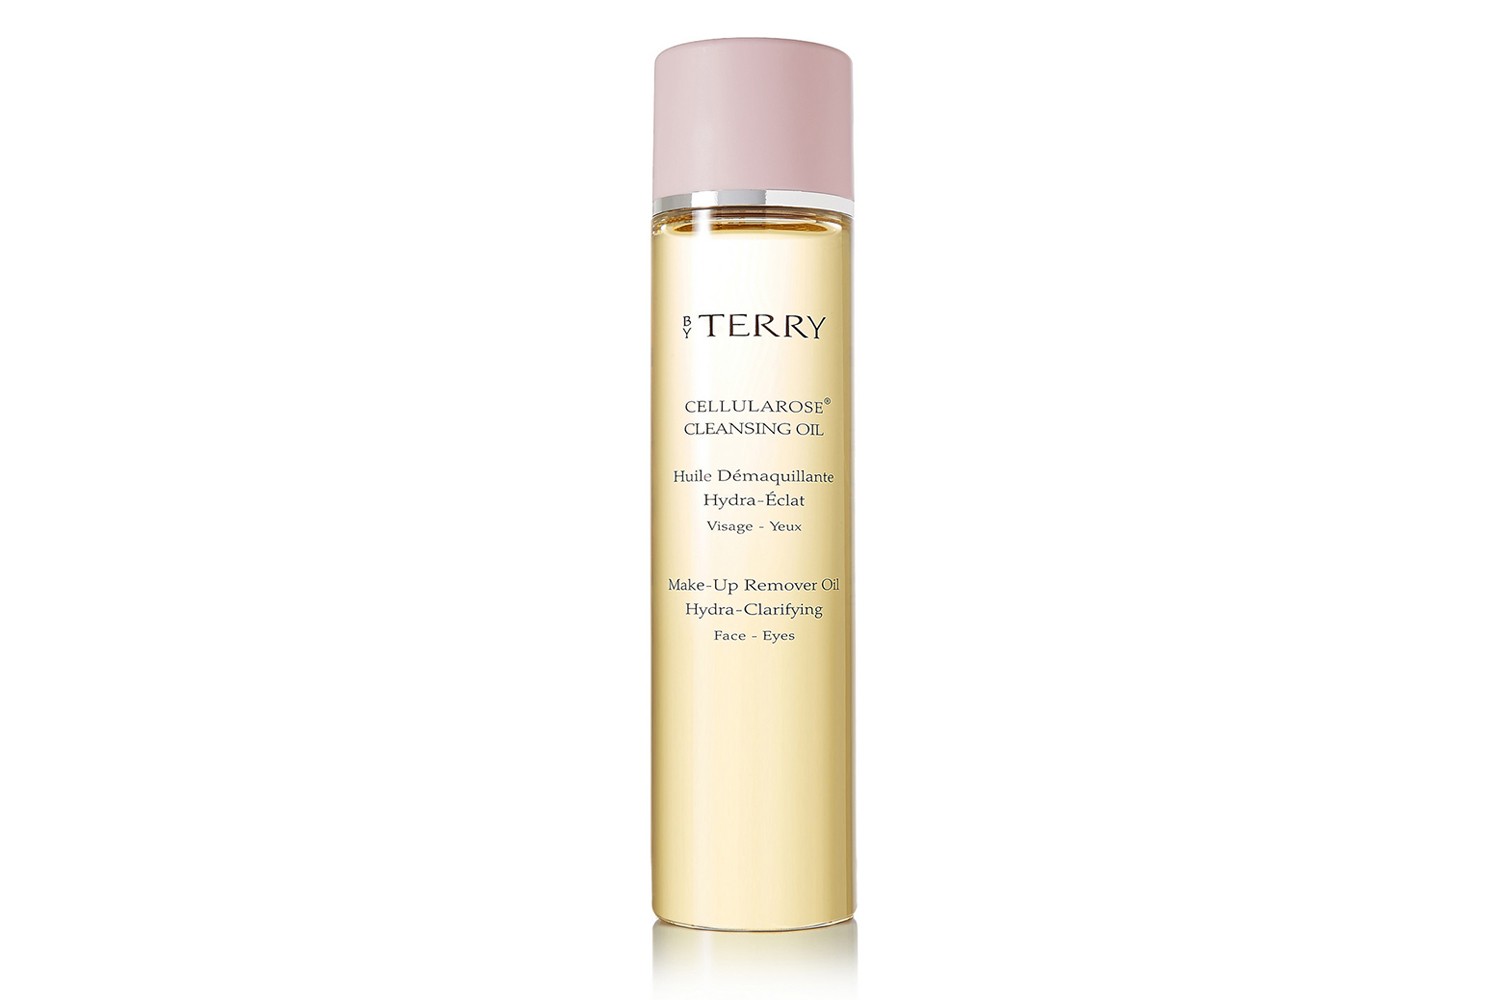 Cellularose Cleansing Oil, By Terry (£ 42)